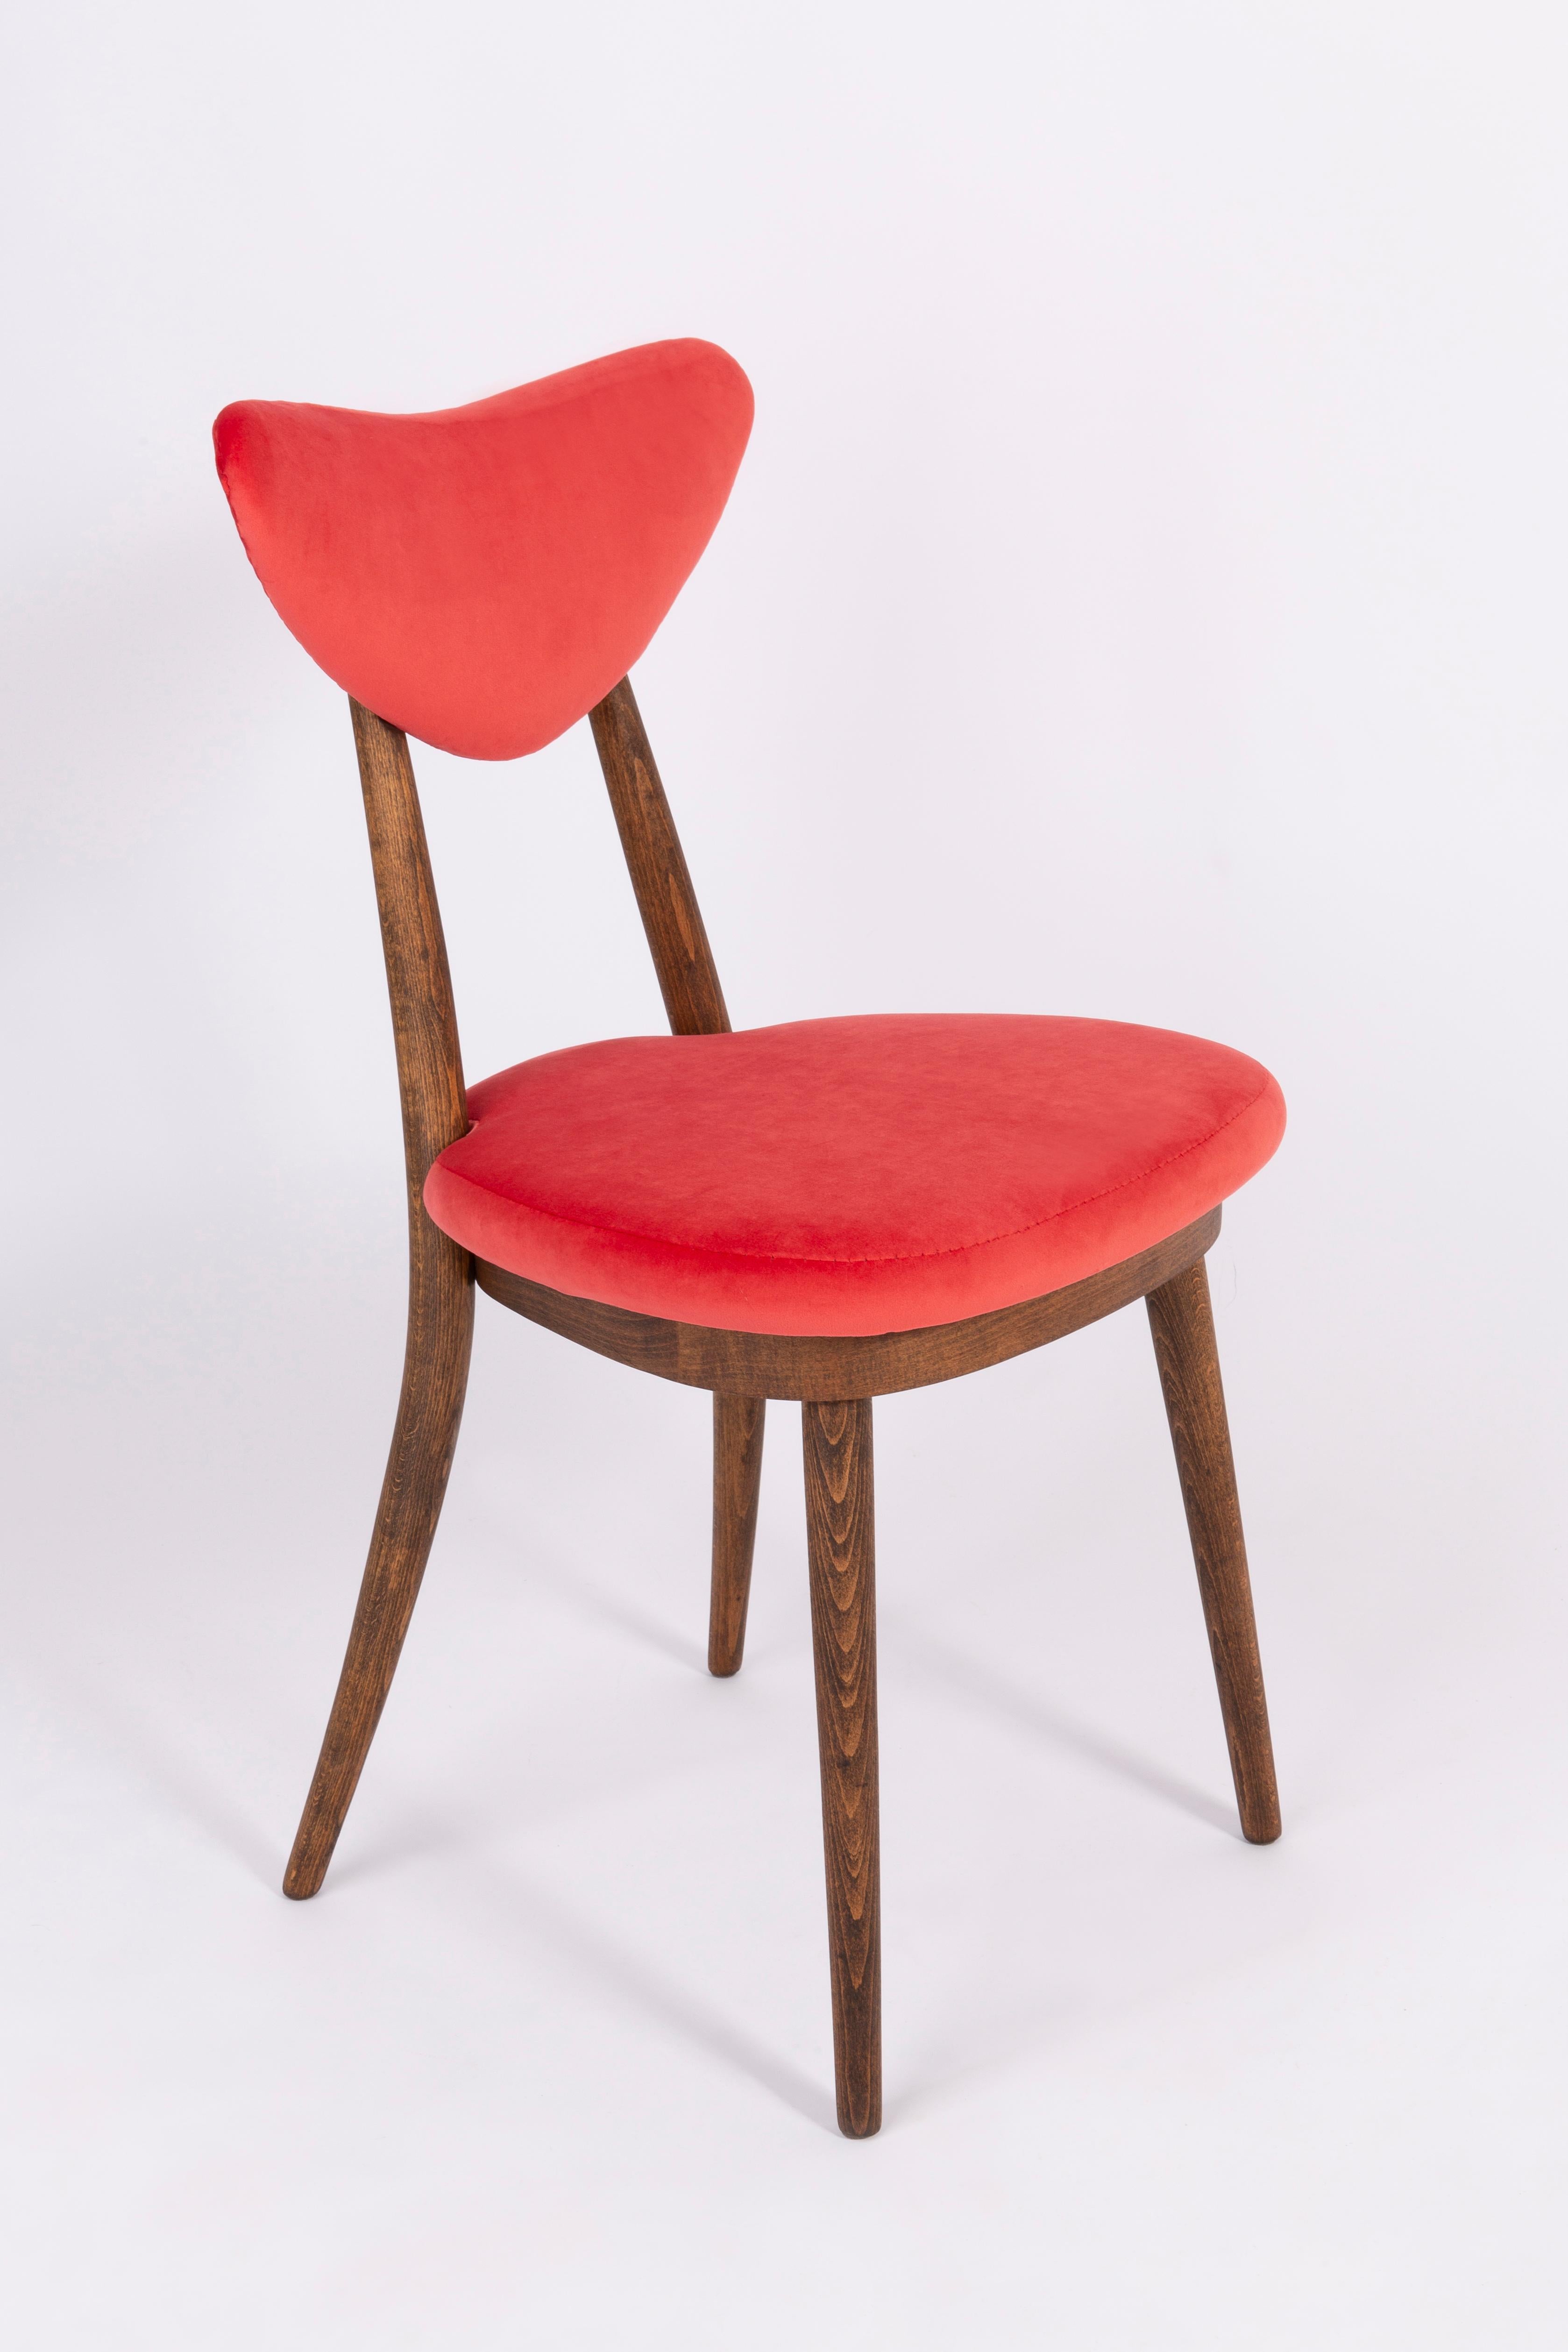 Set of Four Red Heart Chairs, Poland, 1960s For Sale 6